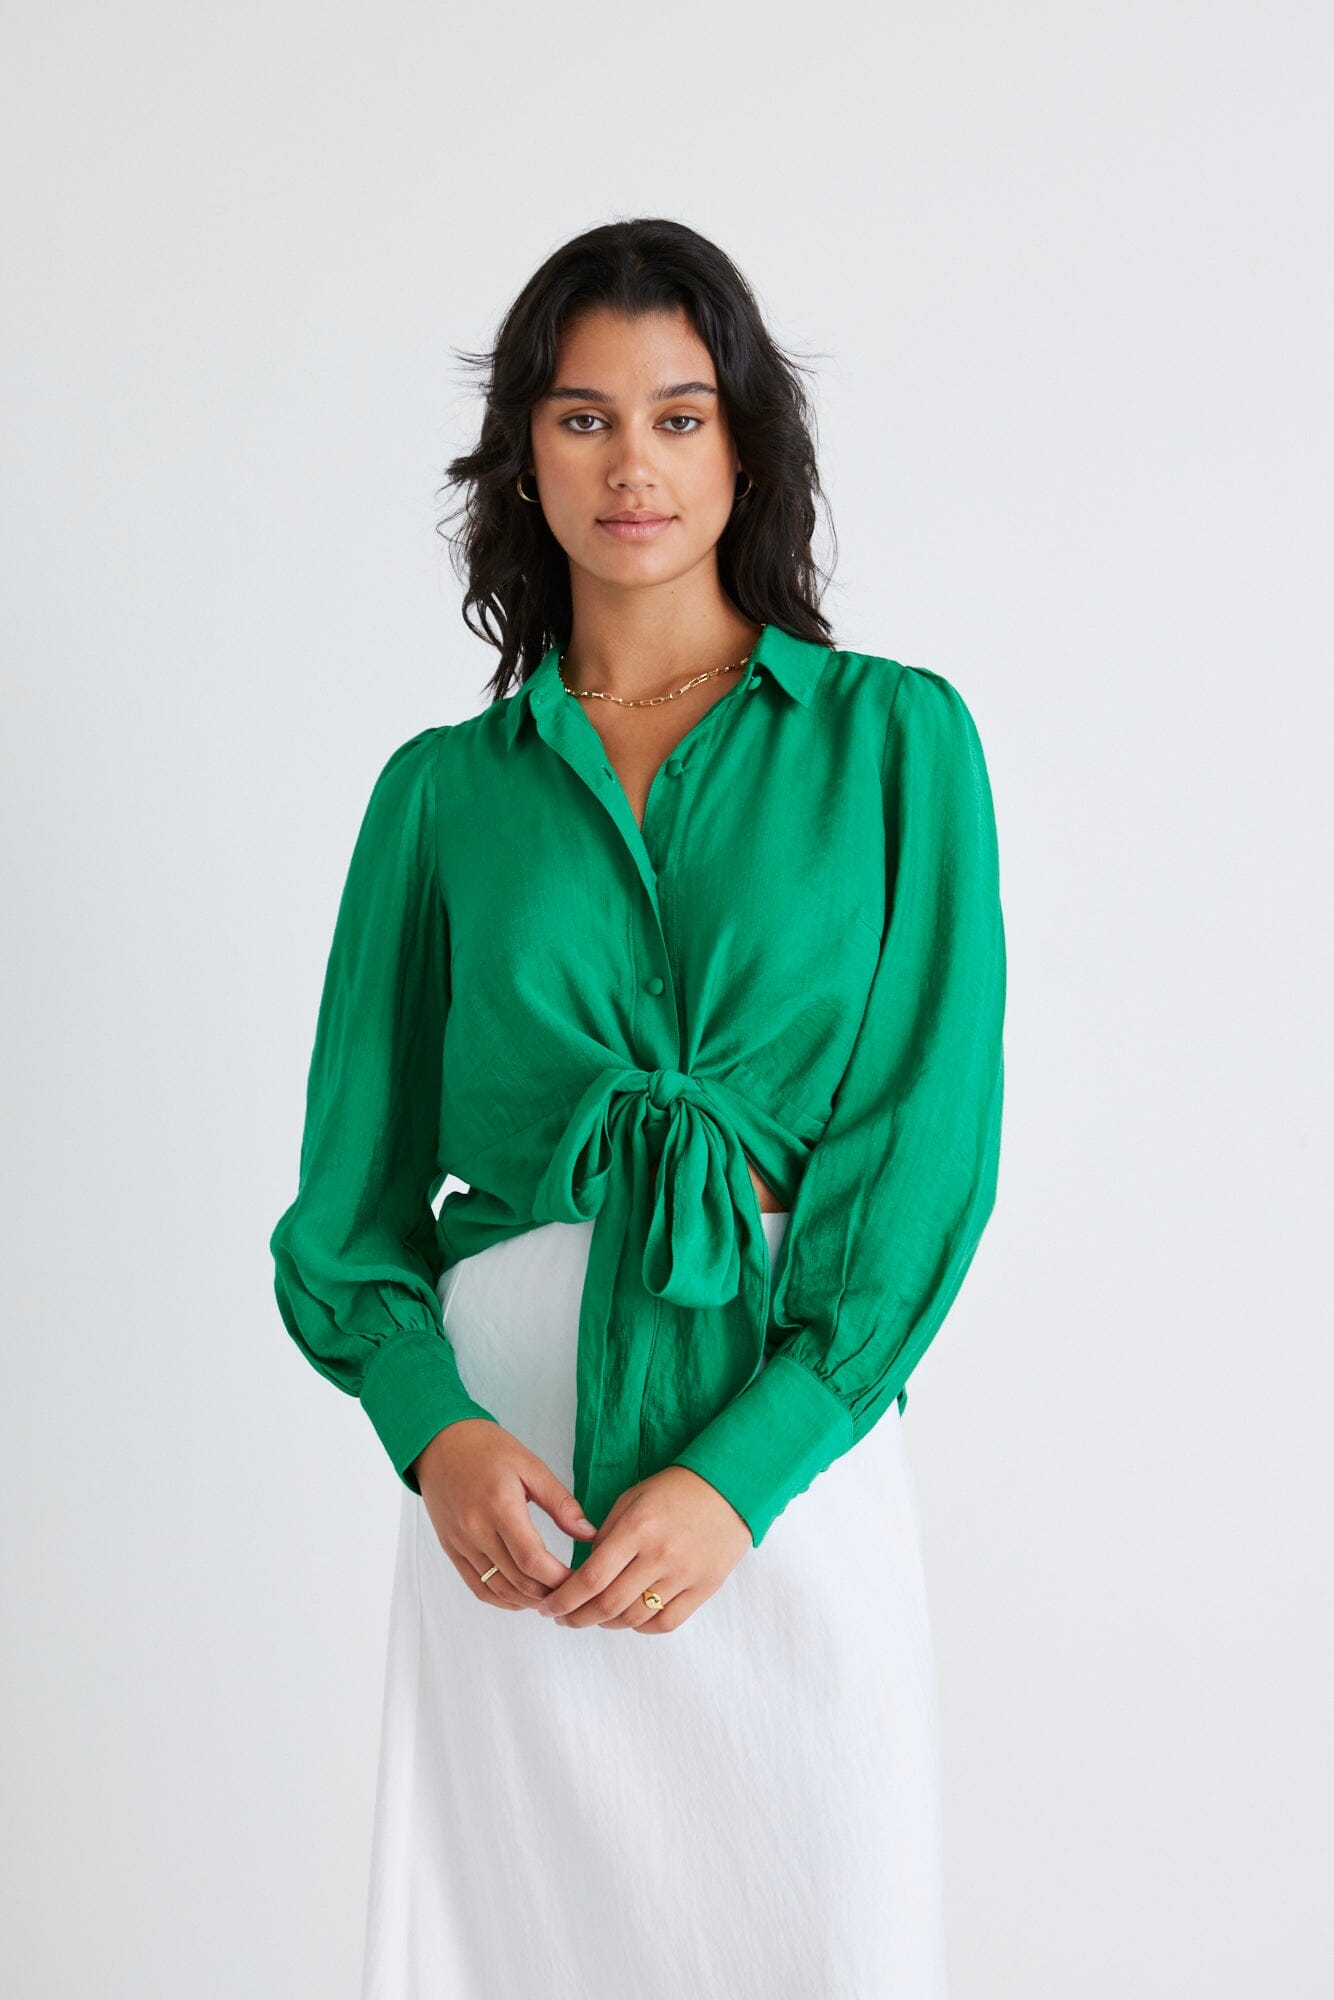 AMONG THE BRAVE - Victory Textured Tie Front Shirt - Palm Green Womens AMONG THE BRAVE